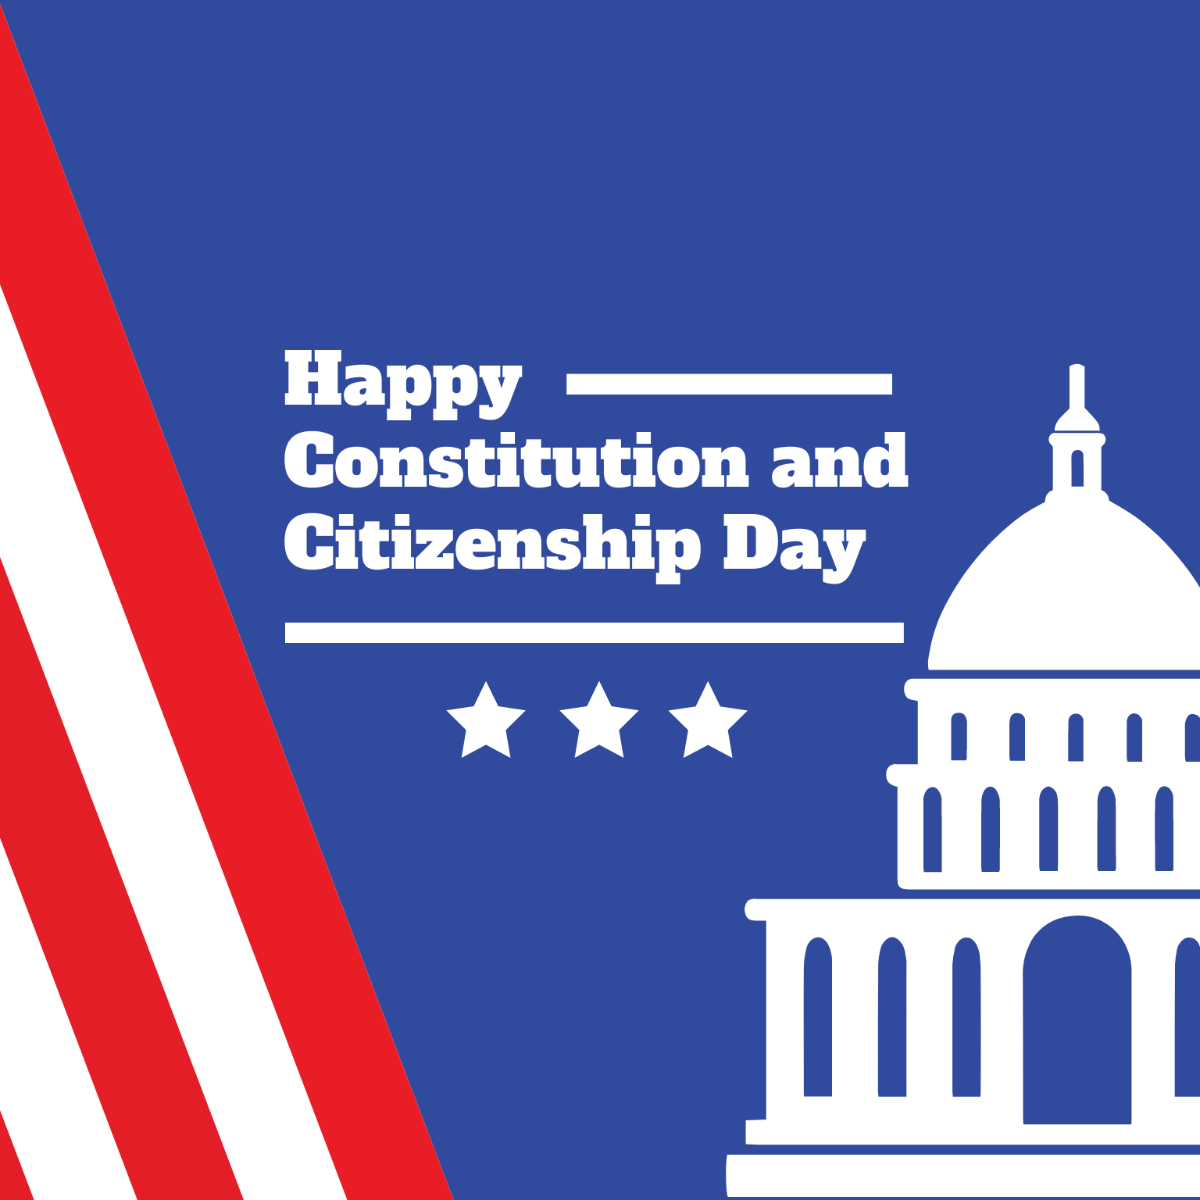 Happy Constitution and Citizenship Day Illustration Template